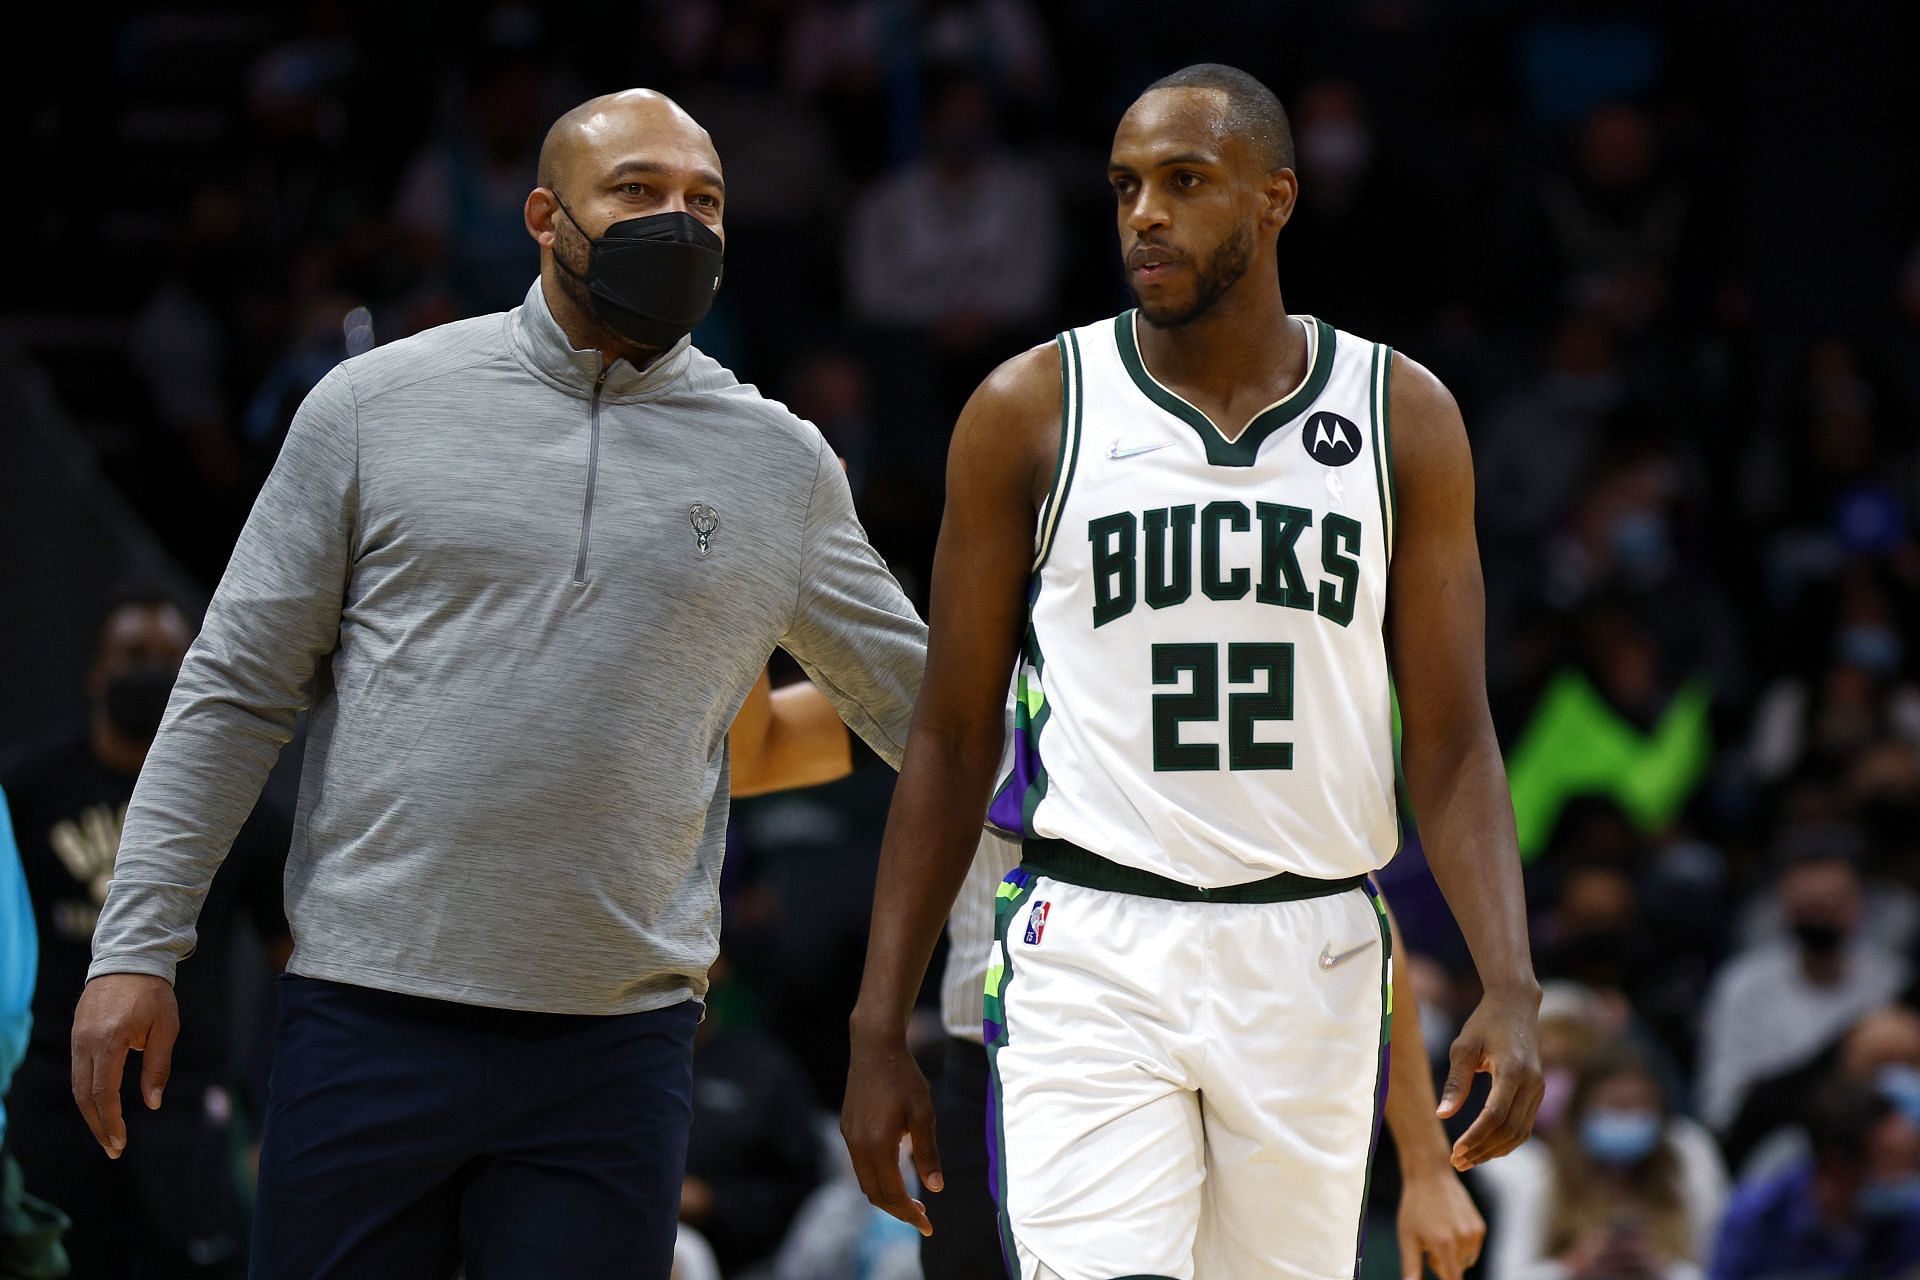 Acting head coach Darvin Ham of the Milwaukee Bucks speaks with Khris Middleton No. 22 during the first quarter of the game against the Charlotte Hornets.